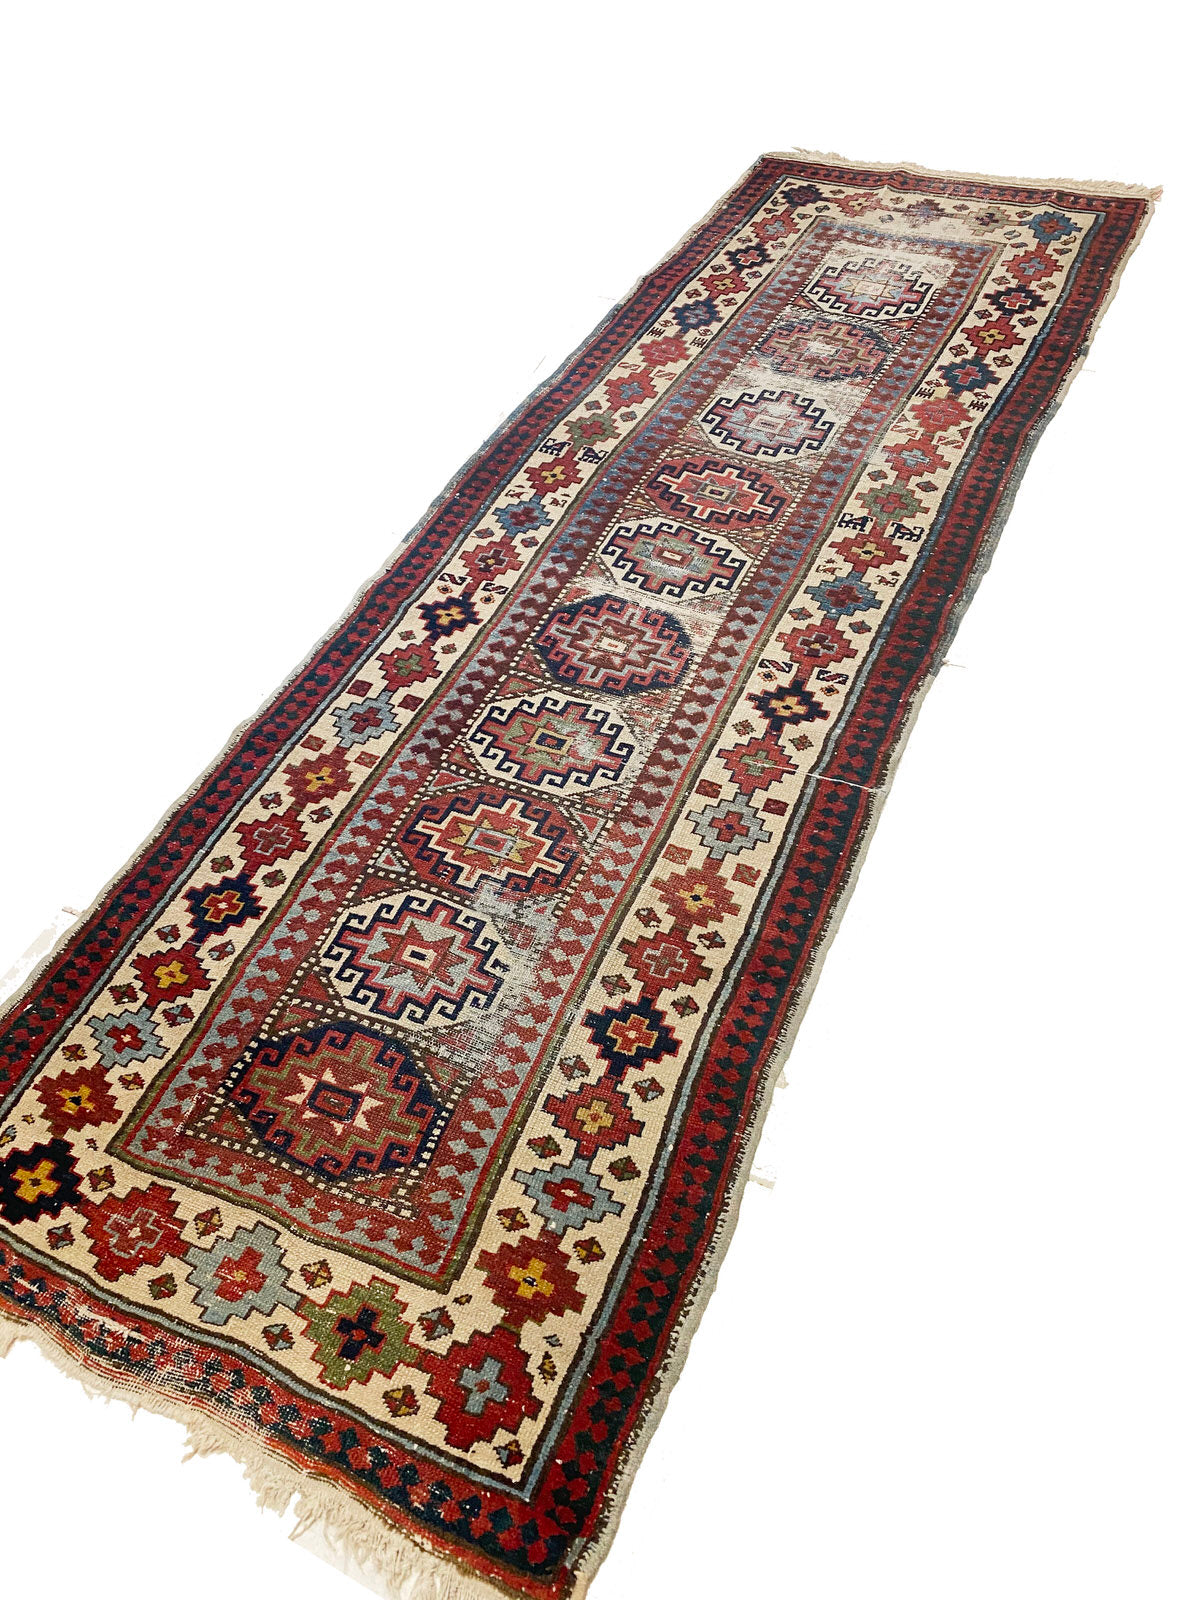 Red and cream Persian rug runner with bright red, blue, green and gold geometric patterns - available from King Kennedy Rugs Los Angeles